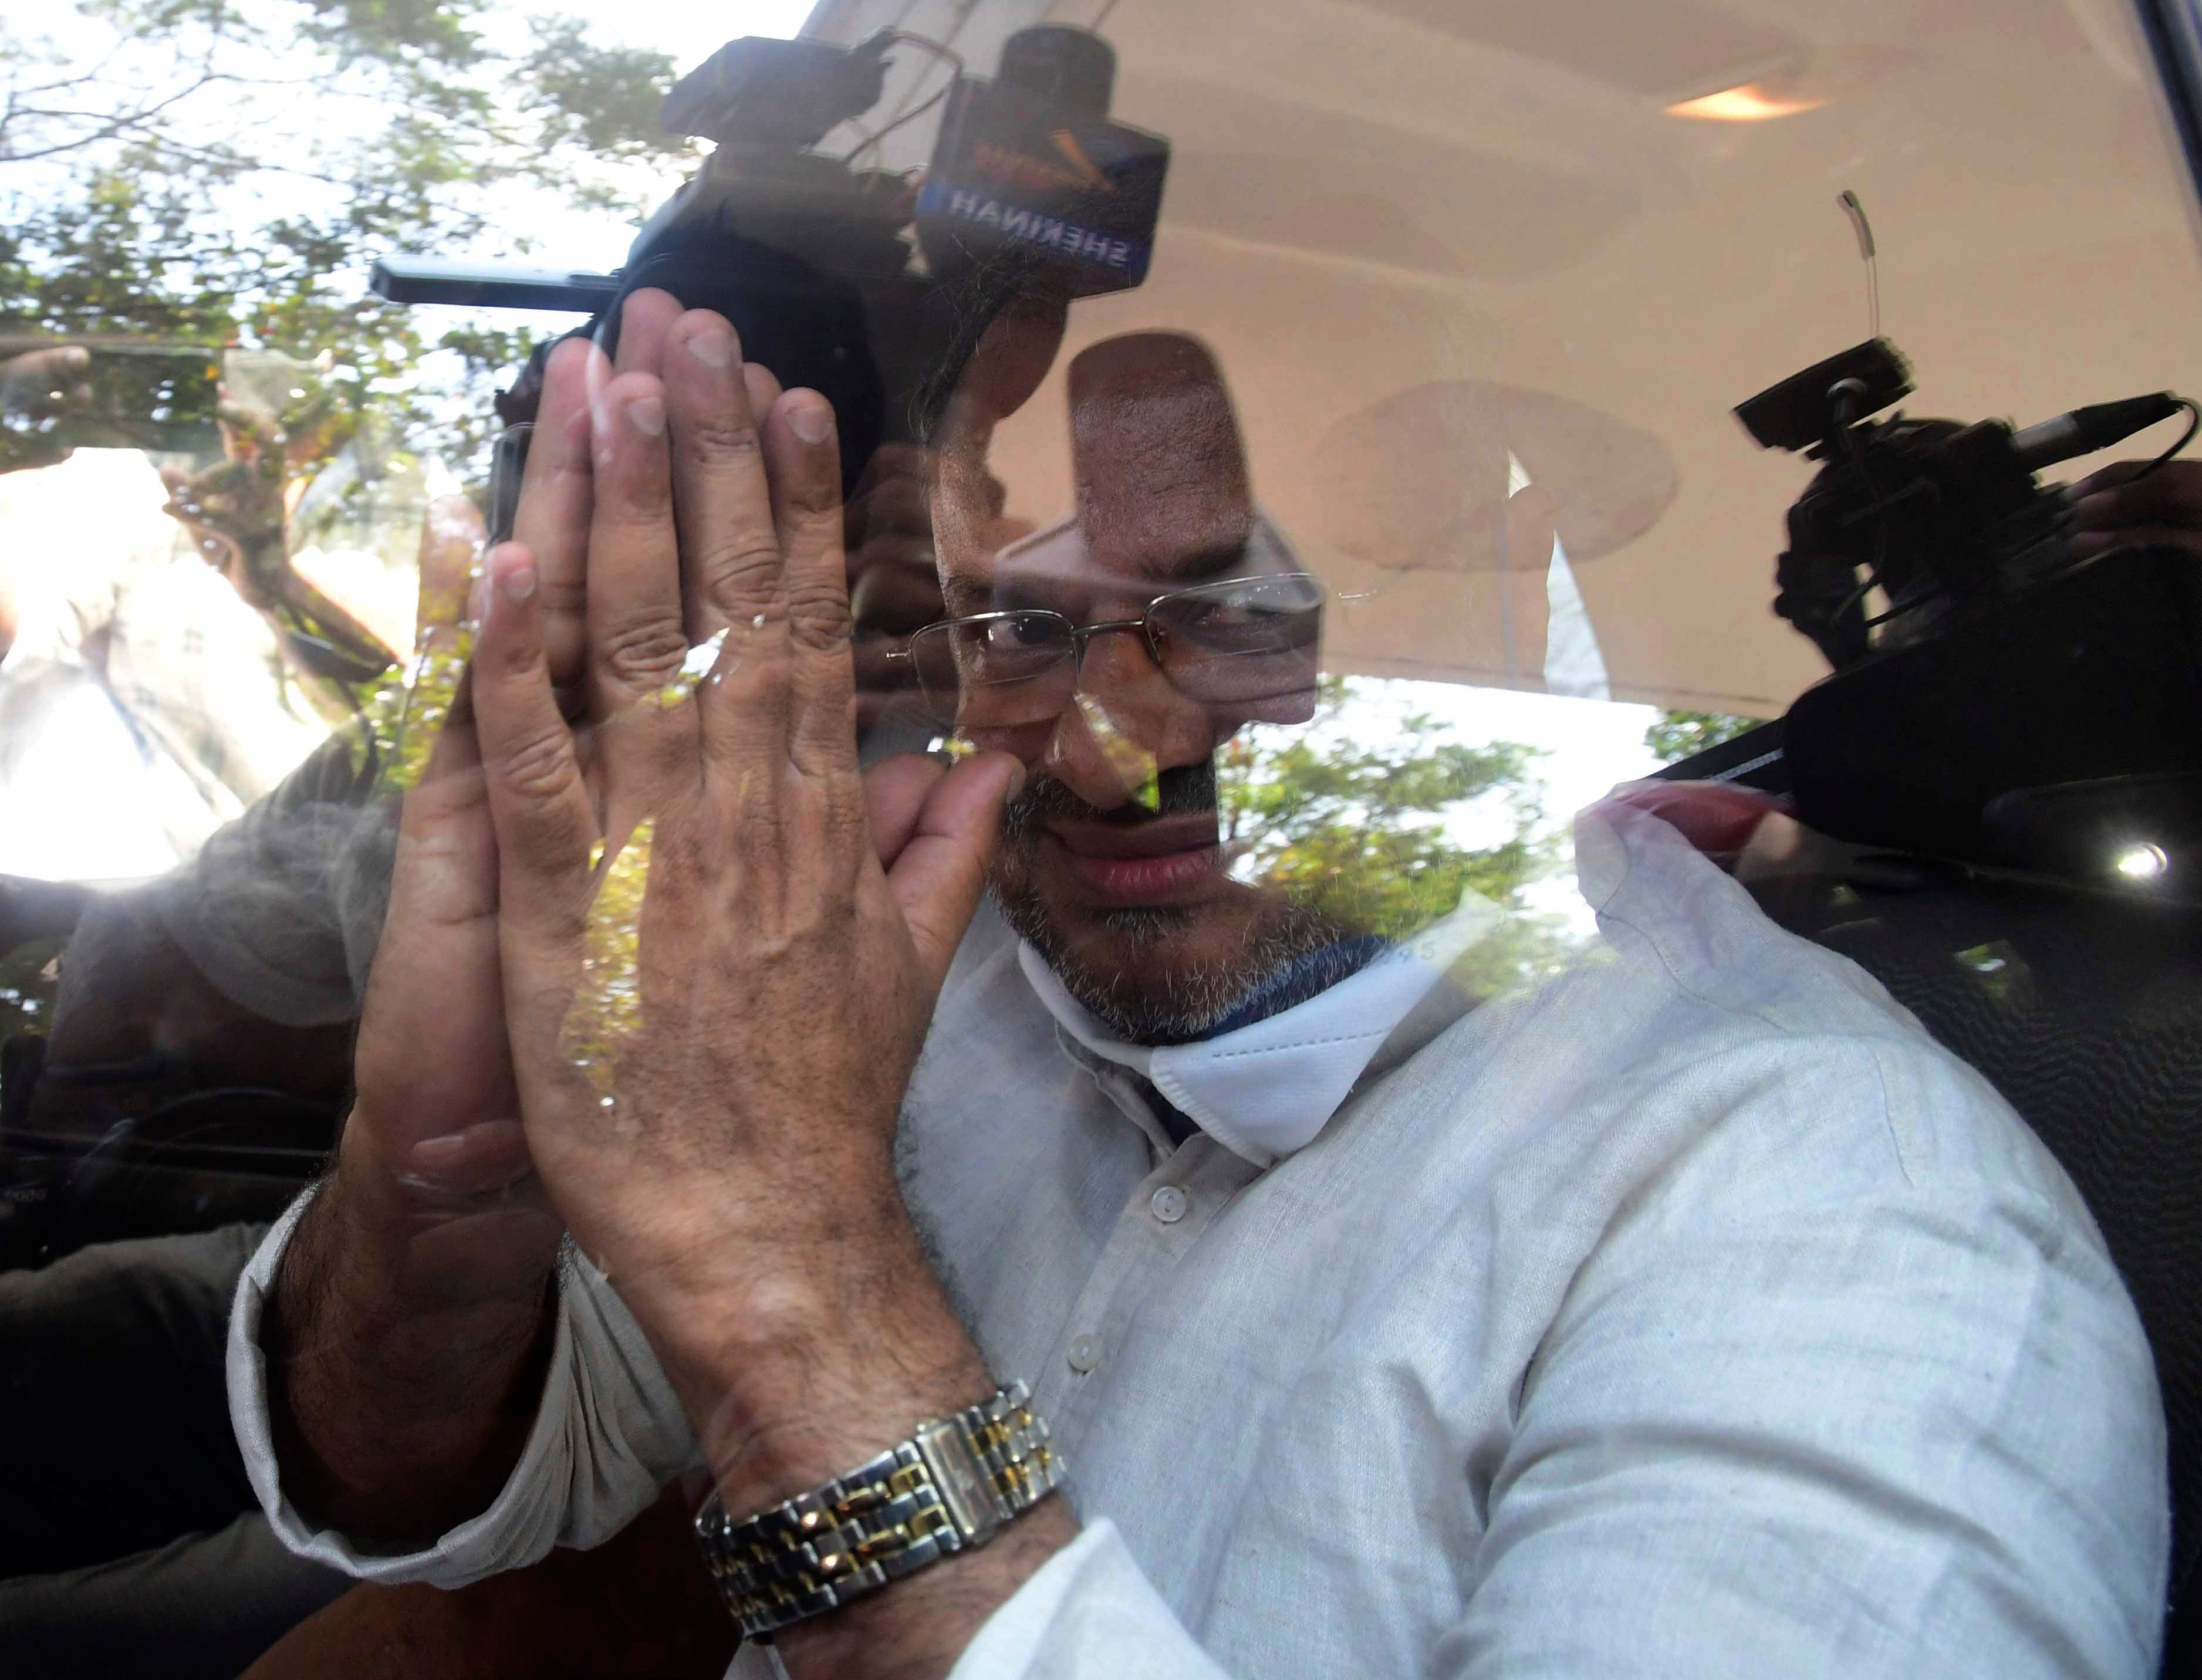 Bishop Franco Mulakkal greets the media as he leaves a court in Kottayam, India on 14 January 2022